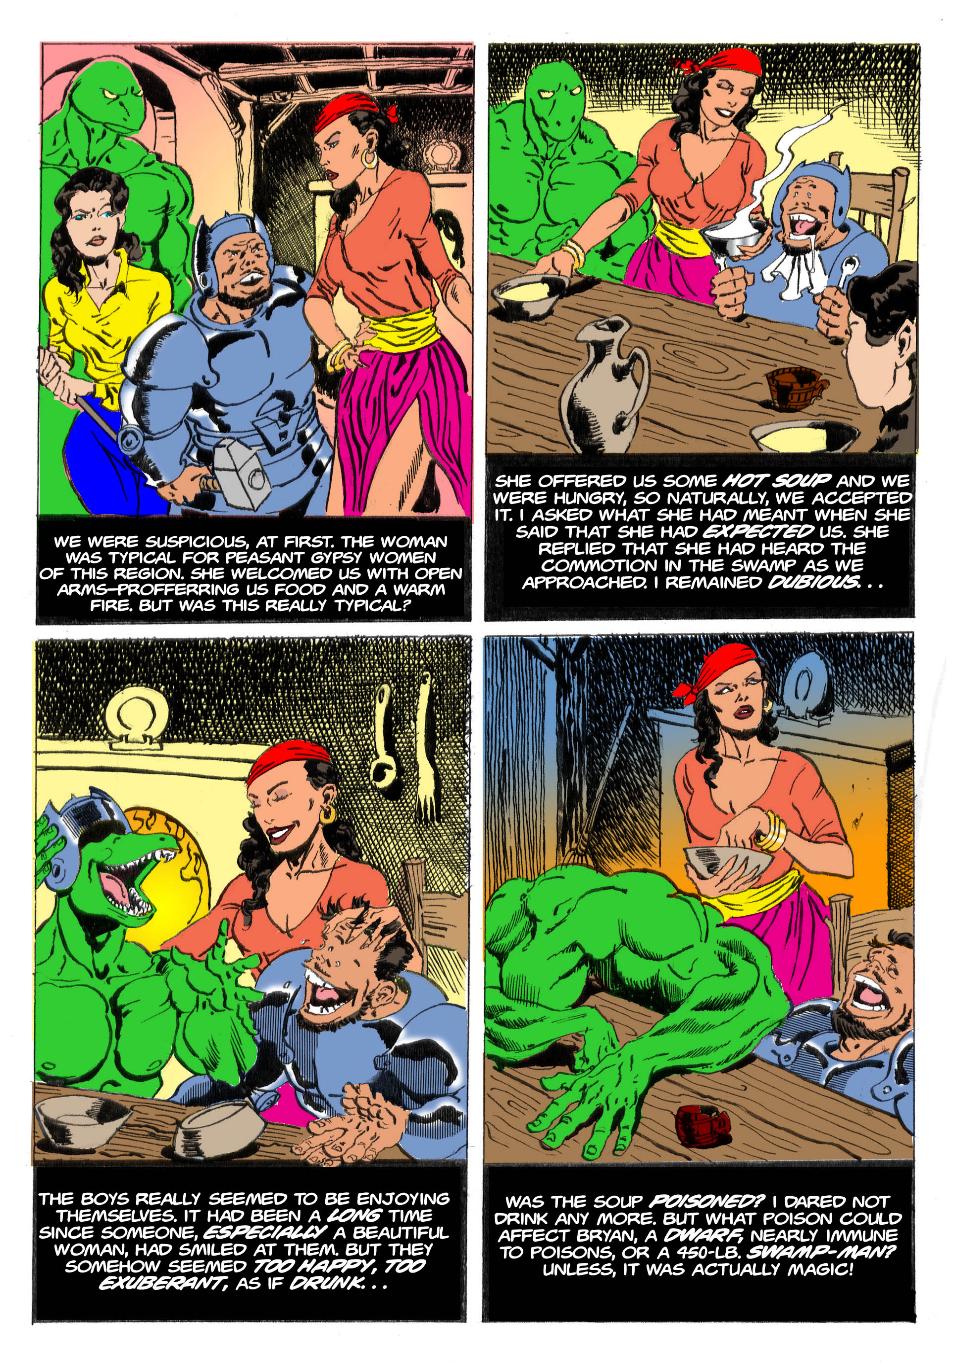 Book 2: “The Deadly Dungeons of Baba Yaga” Page 29